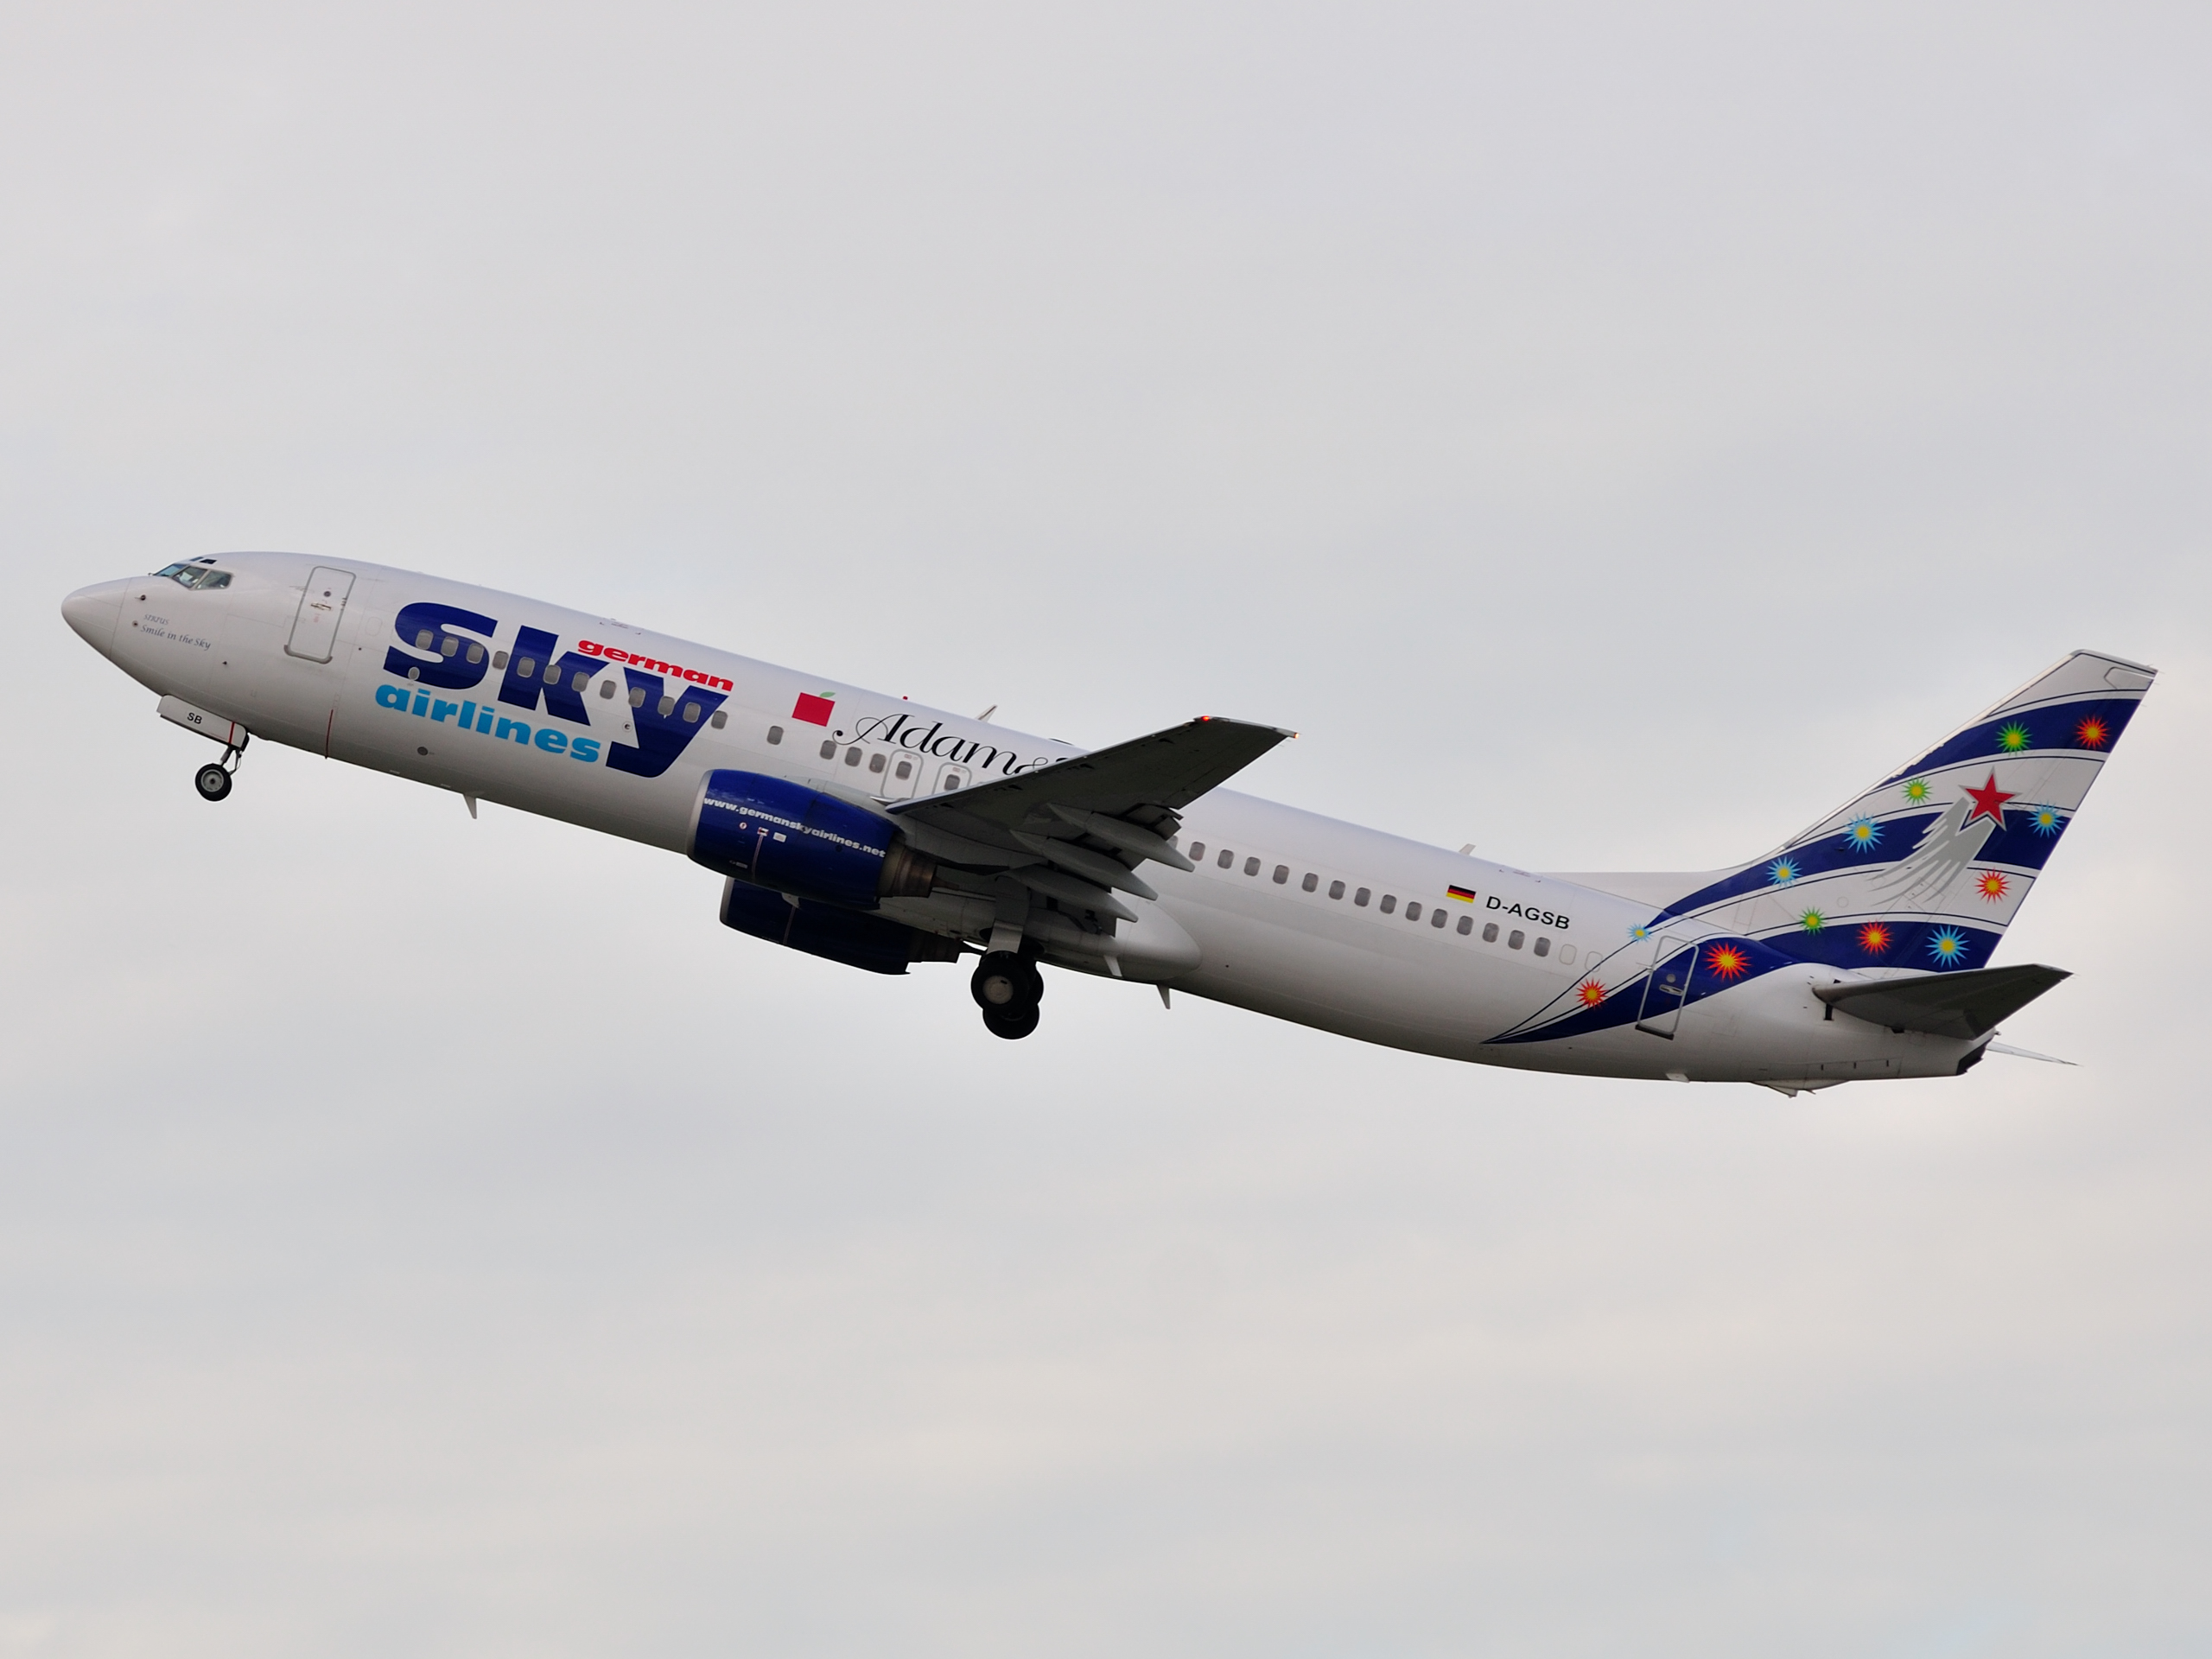 Sky Airlines B737-800 D-AGSB